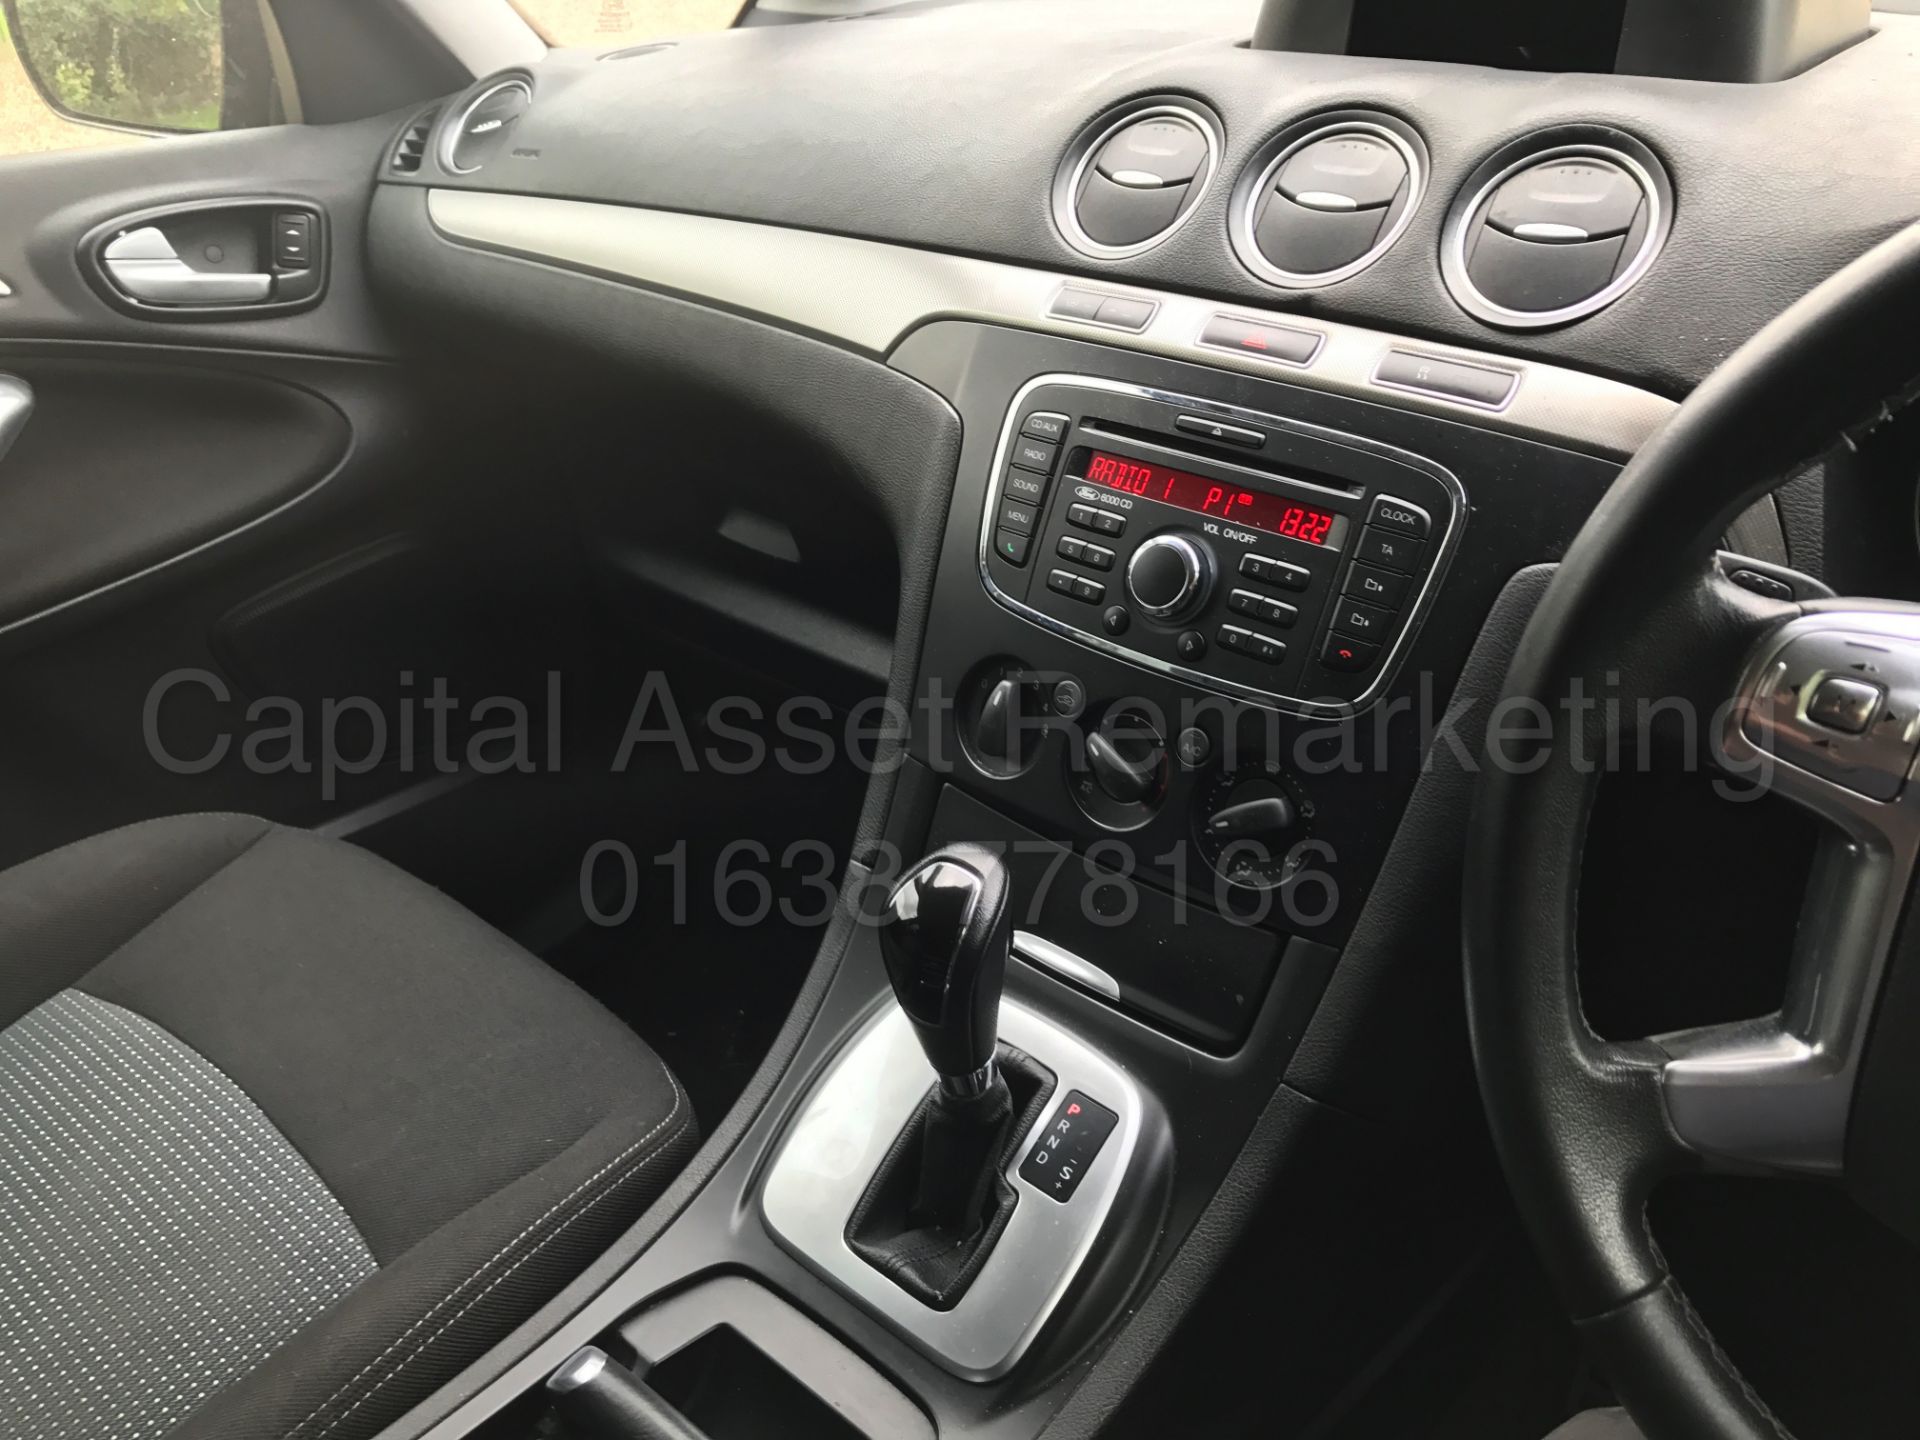 FORD GALAXY 'ZETEC' 7 SEATER MPV (2014 MODEL) '2.0 TDCI - 140 BHP - POWER SHIFT' (1 OWNER FROM NEW) - Image 21 of 27